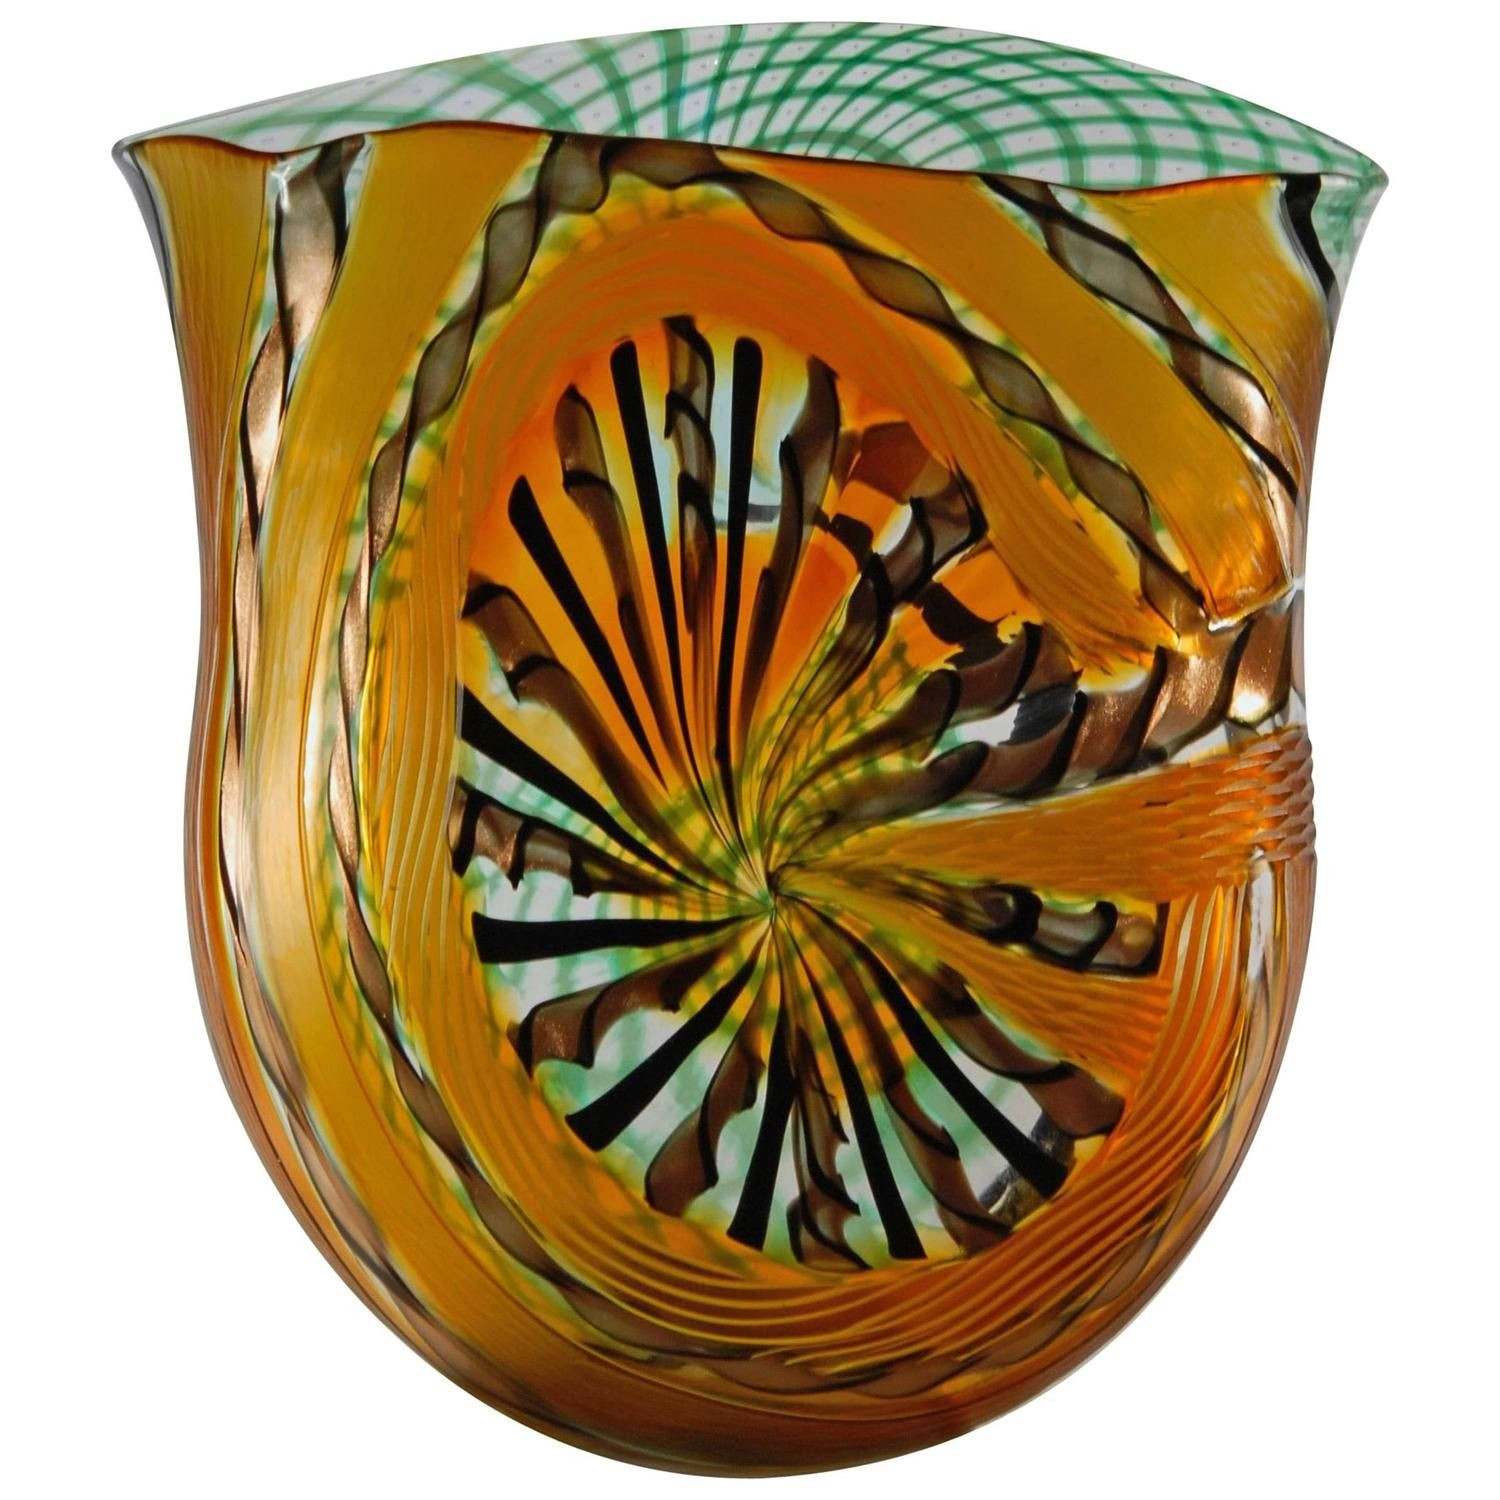 17 Great Murano Glass Vases for Sale 2022 free download murano glass vases for sale of afro celotto sunflower colors vessel sunflowers decorative regarding afro celotto sunflower colors vessel